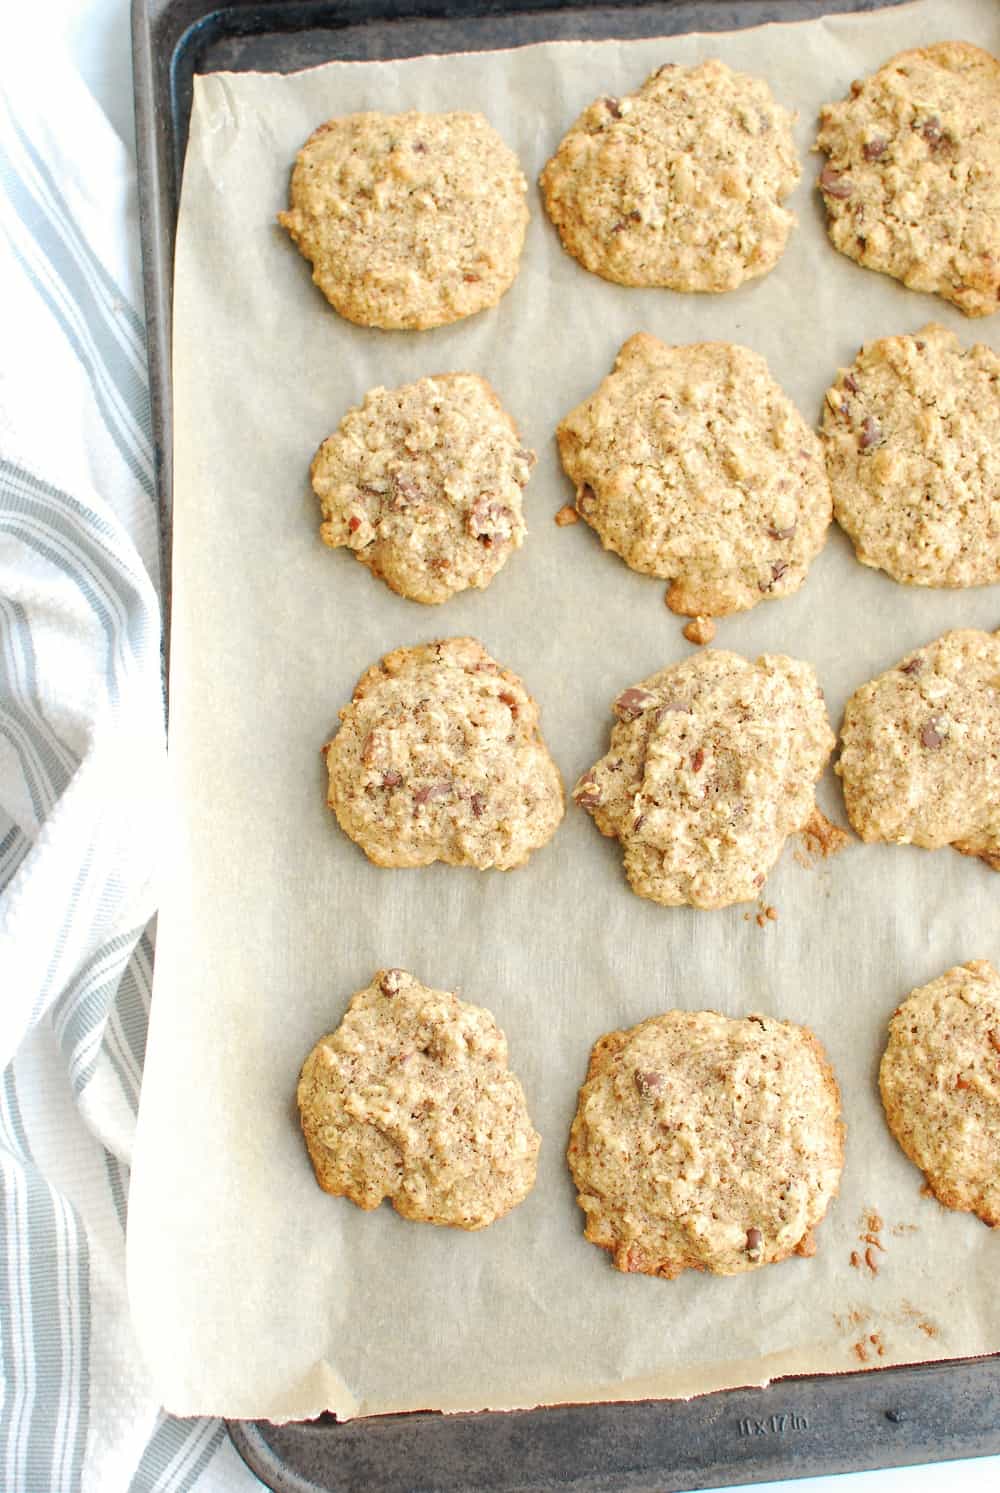 A baking sheet with parchment paper full of cookies.